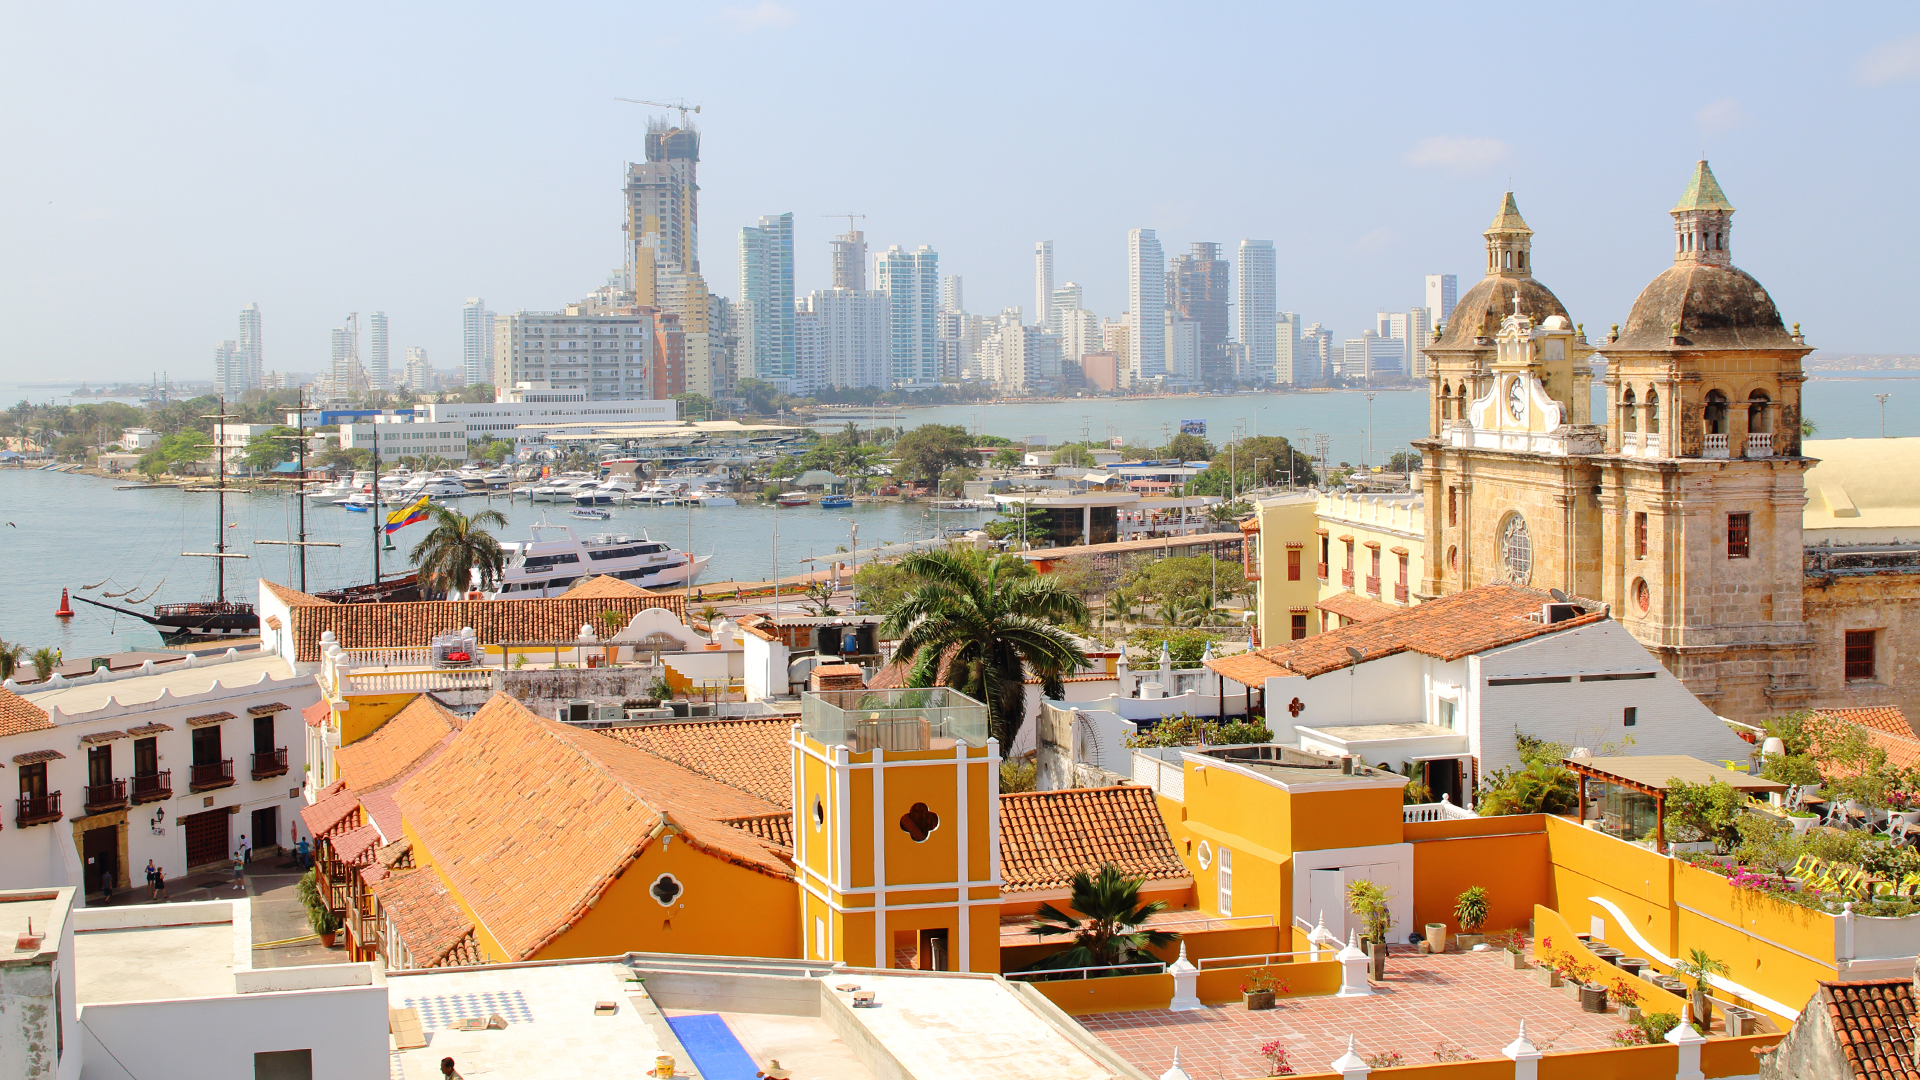 Waterfront Cities of the World - S4E9 - Cartagena